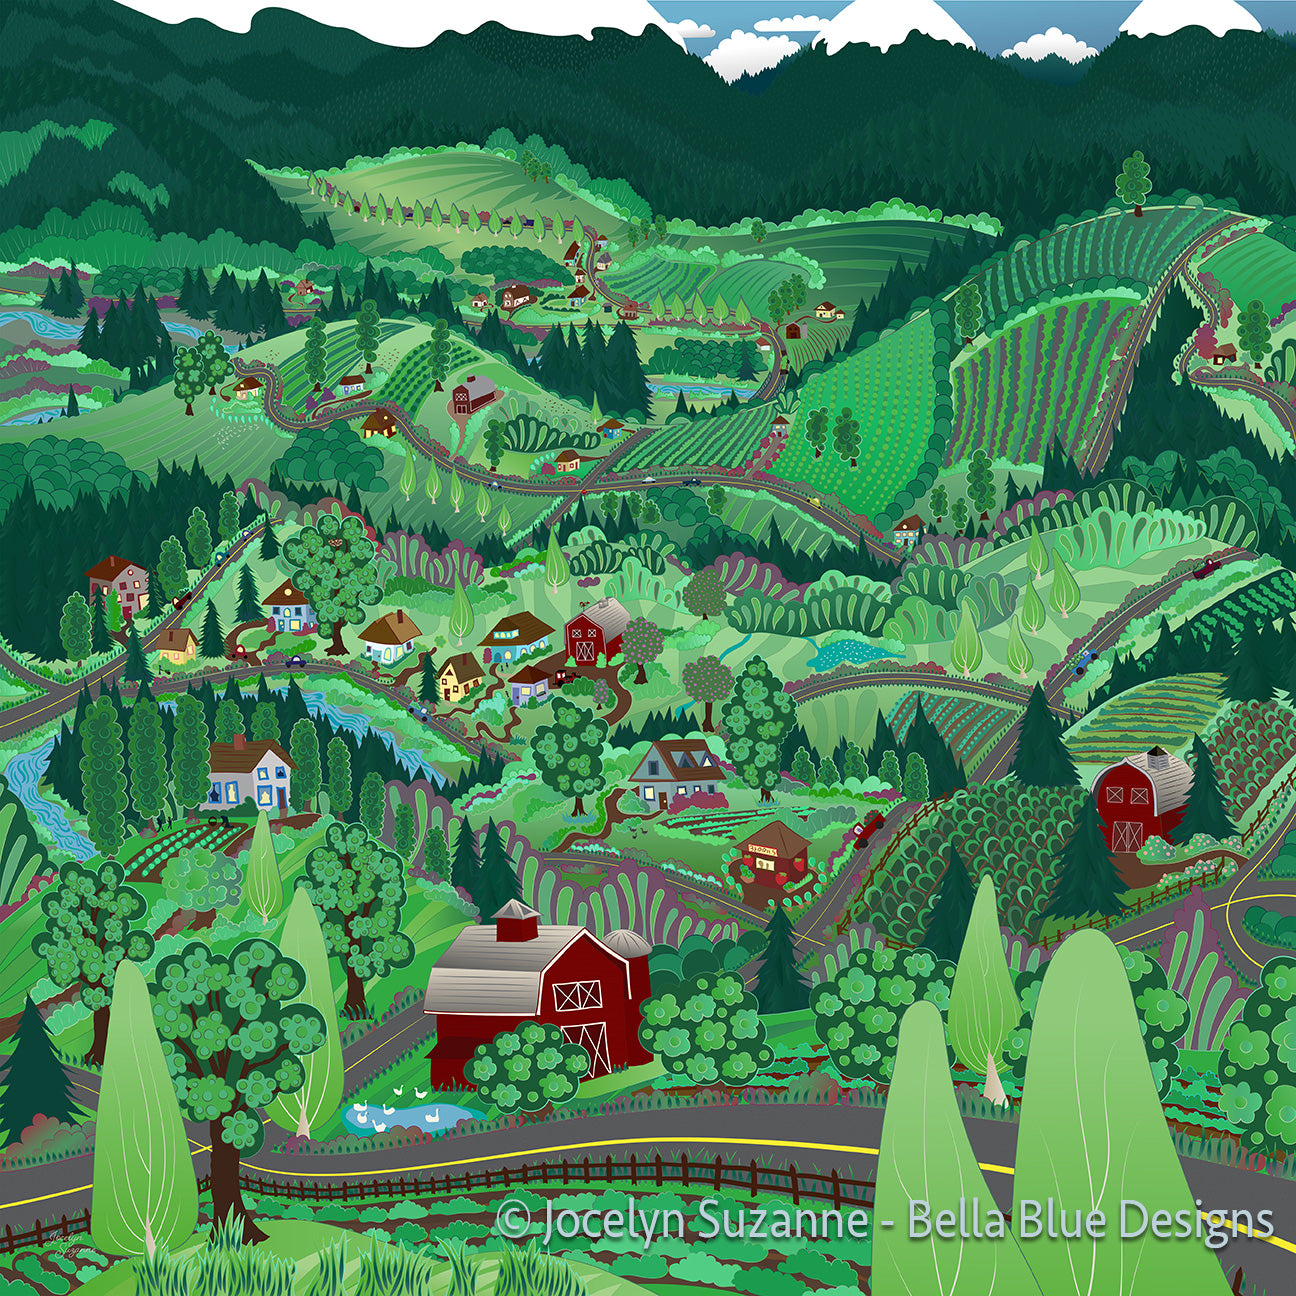 tapestry with digital design showing the way mountain roads and farms roads coincide as the hills roll up and down around farmhouses, surprised barns, fruitful fields and fruit trees all bursting with Mother Nature's many shades of green